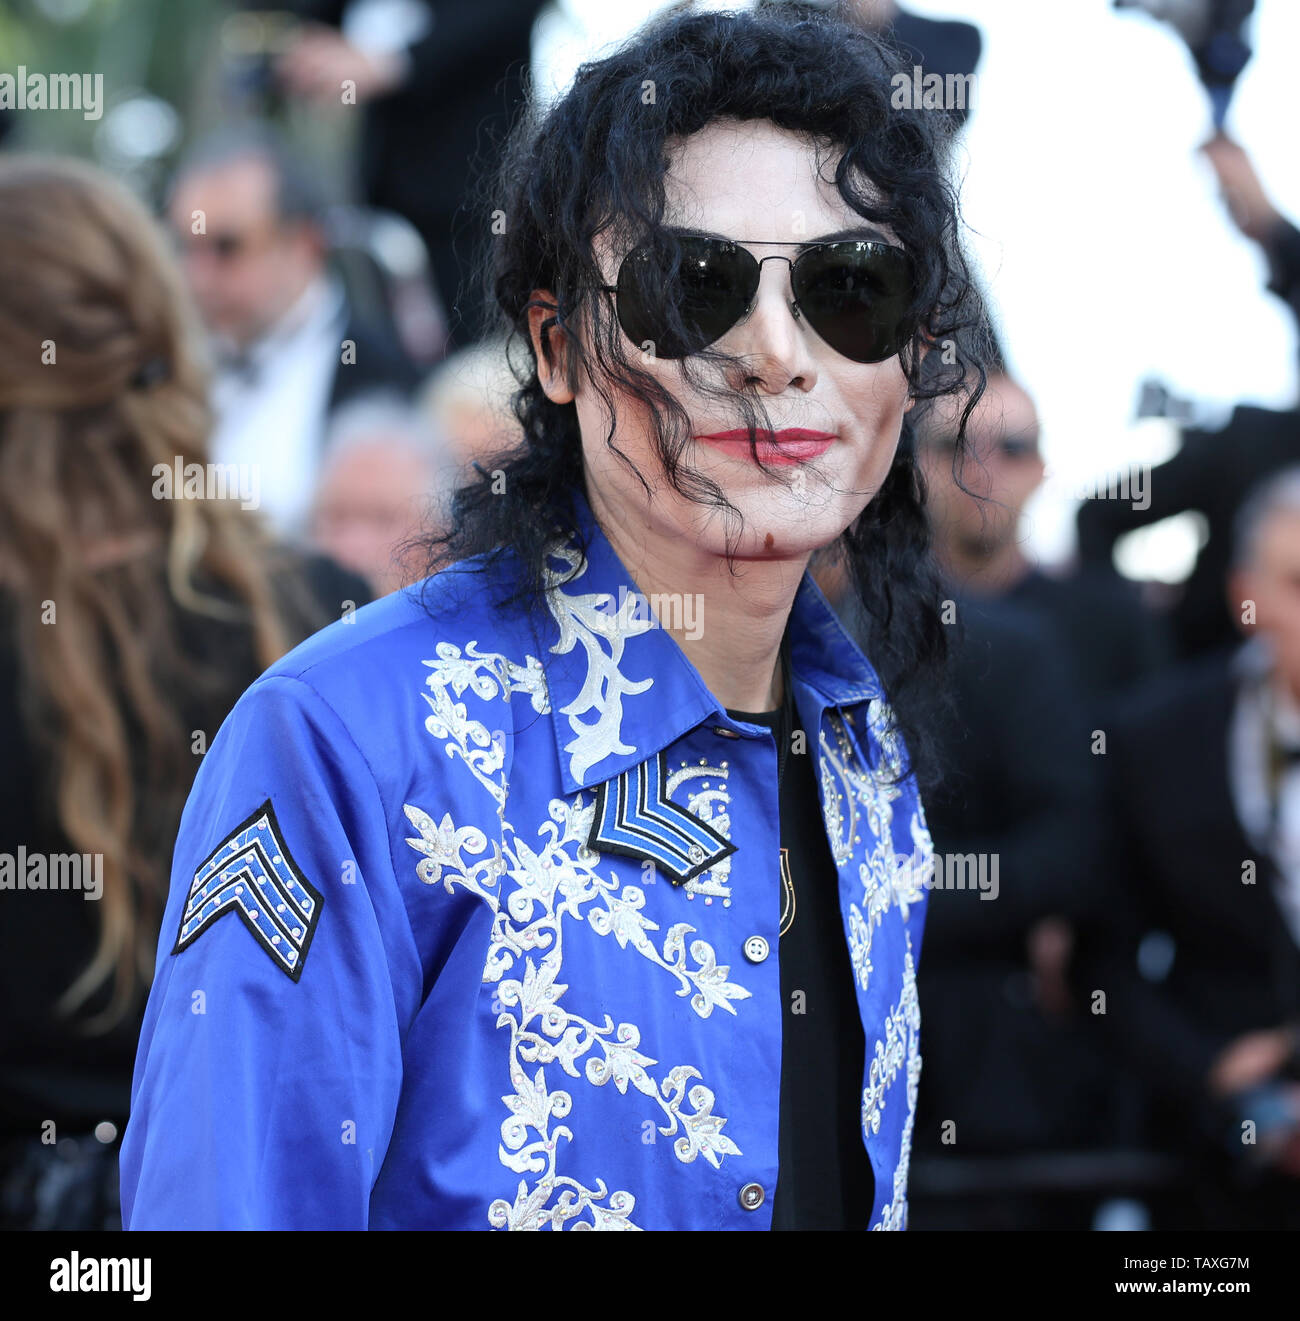 CANNES, FRANCE - MAY 25: A Michael Jackson impersonator attends the Closing Ceremony of the 72nd Cannes Film Festival (Credit: Mickael Chavet/Project  Stock Photo